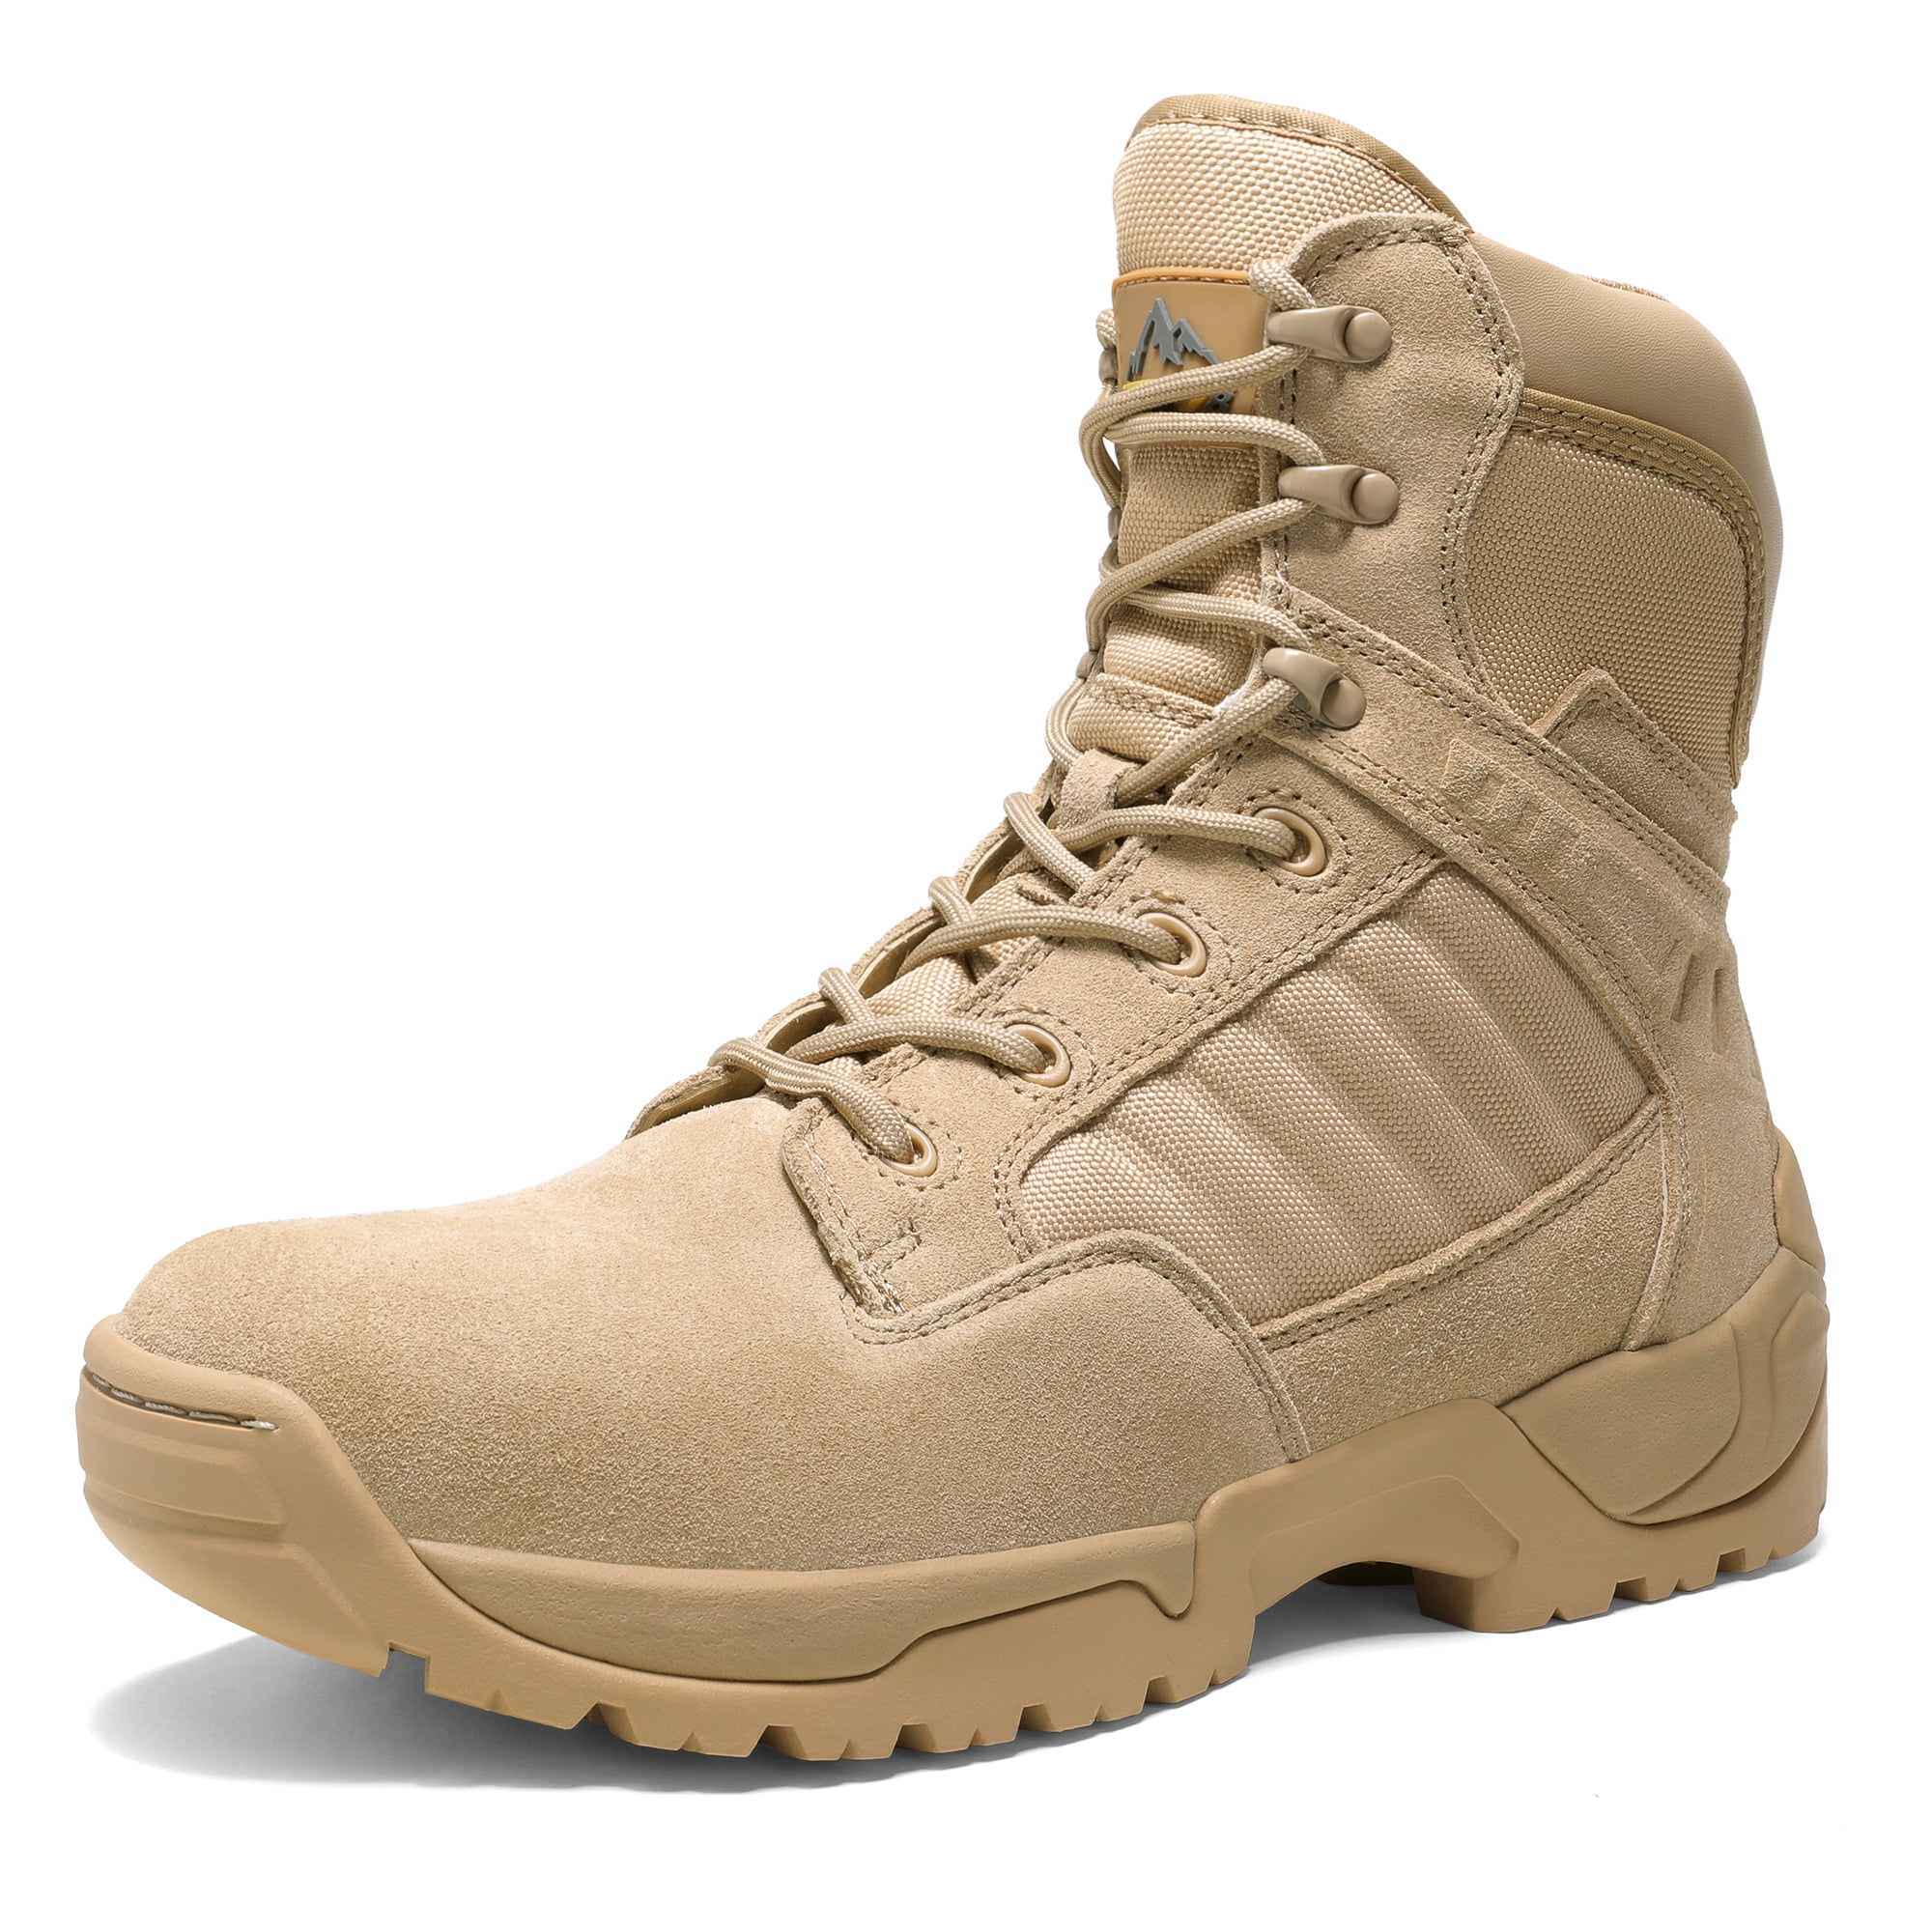 Cerdito saludo Clan Nortiv8 Men's Military Tactical Work Boots Side Zipper Leather Motorcycle Combat  Boots DESERT-W SAND Size 13W - Walmart.com